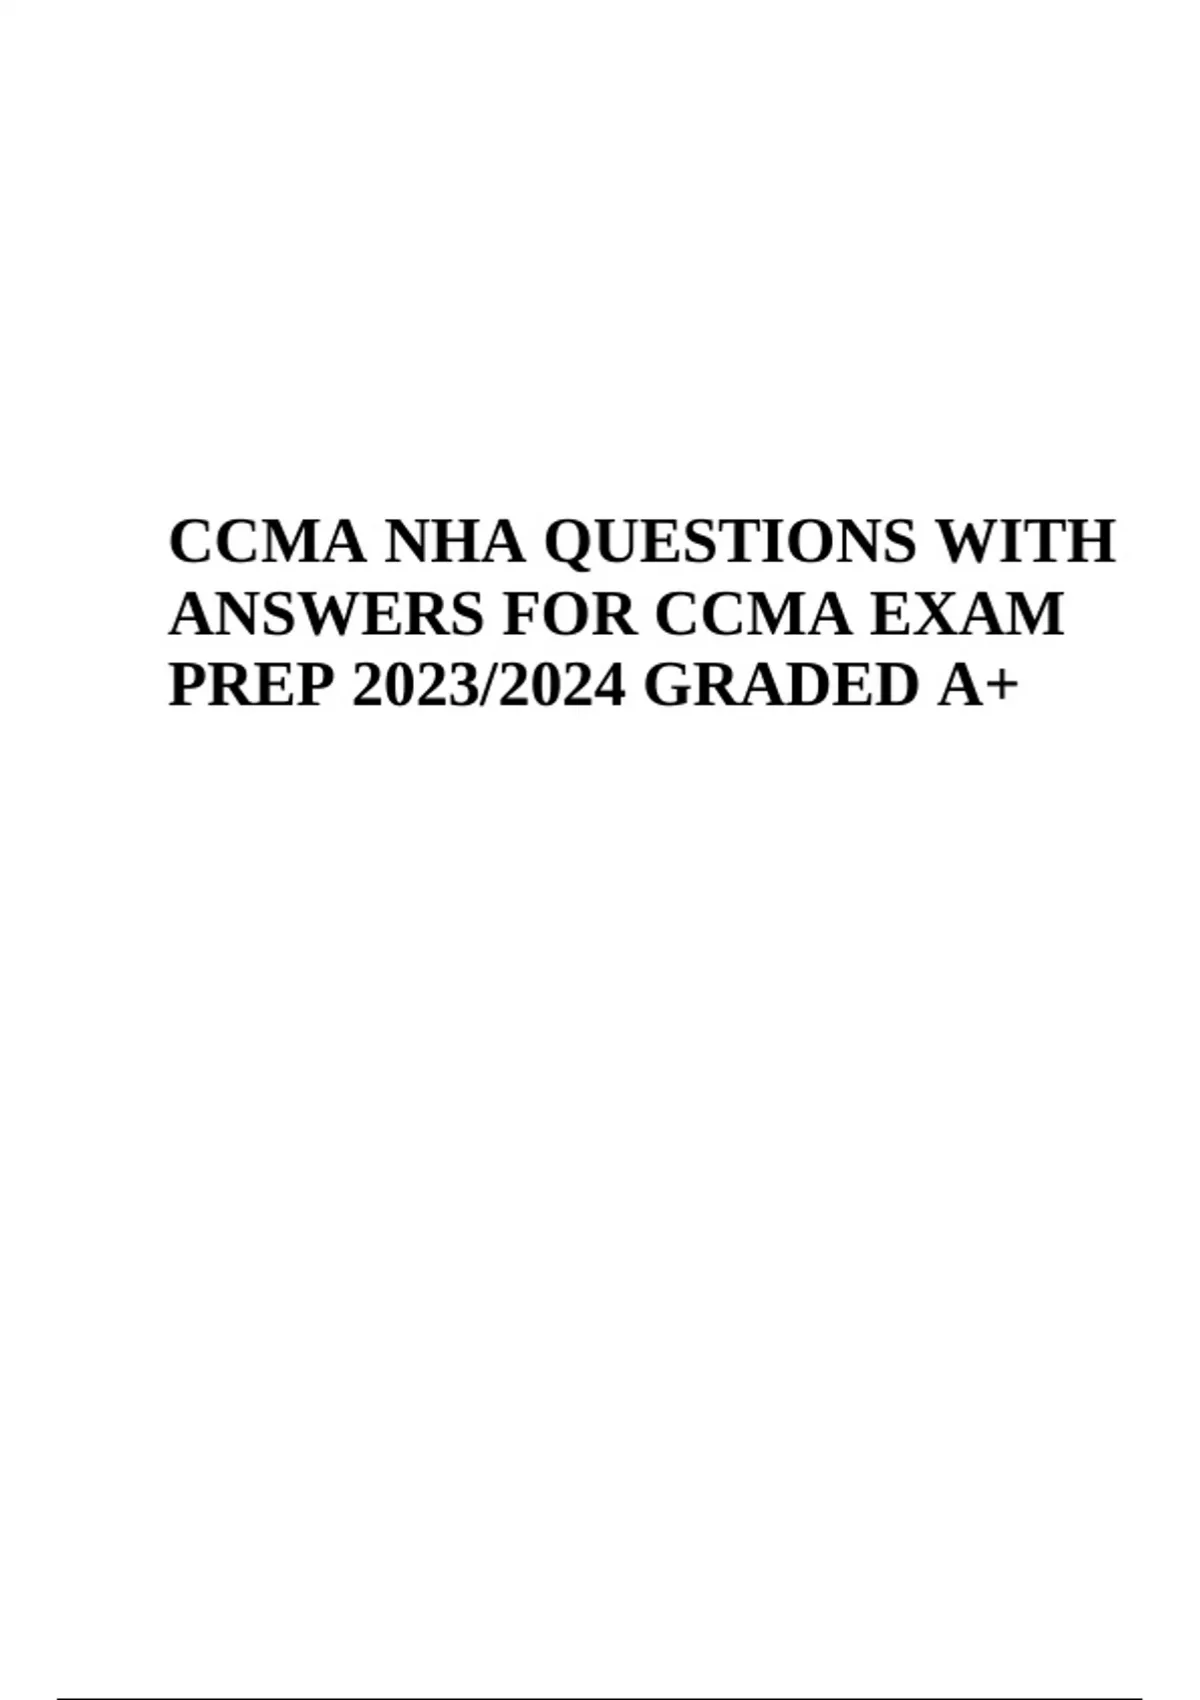 CCMA NHA QUESTIONS WITH ANSWERS FOR CCMA EXAM PREP 2023/2024 GRADED A+